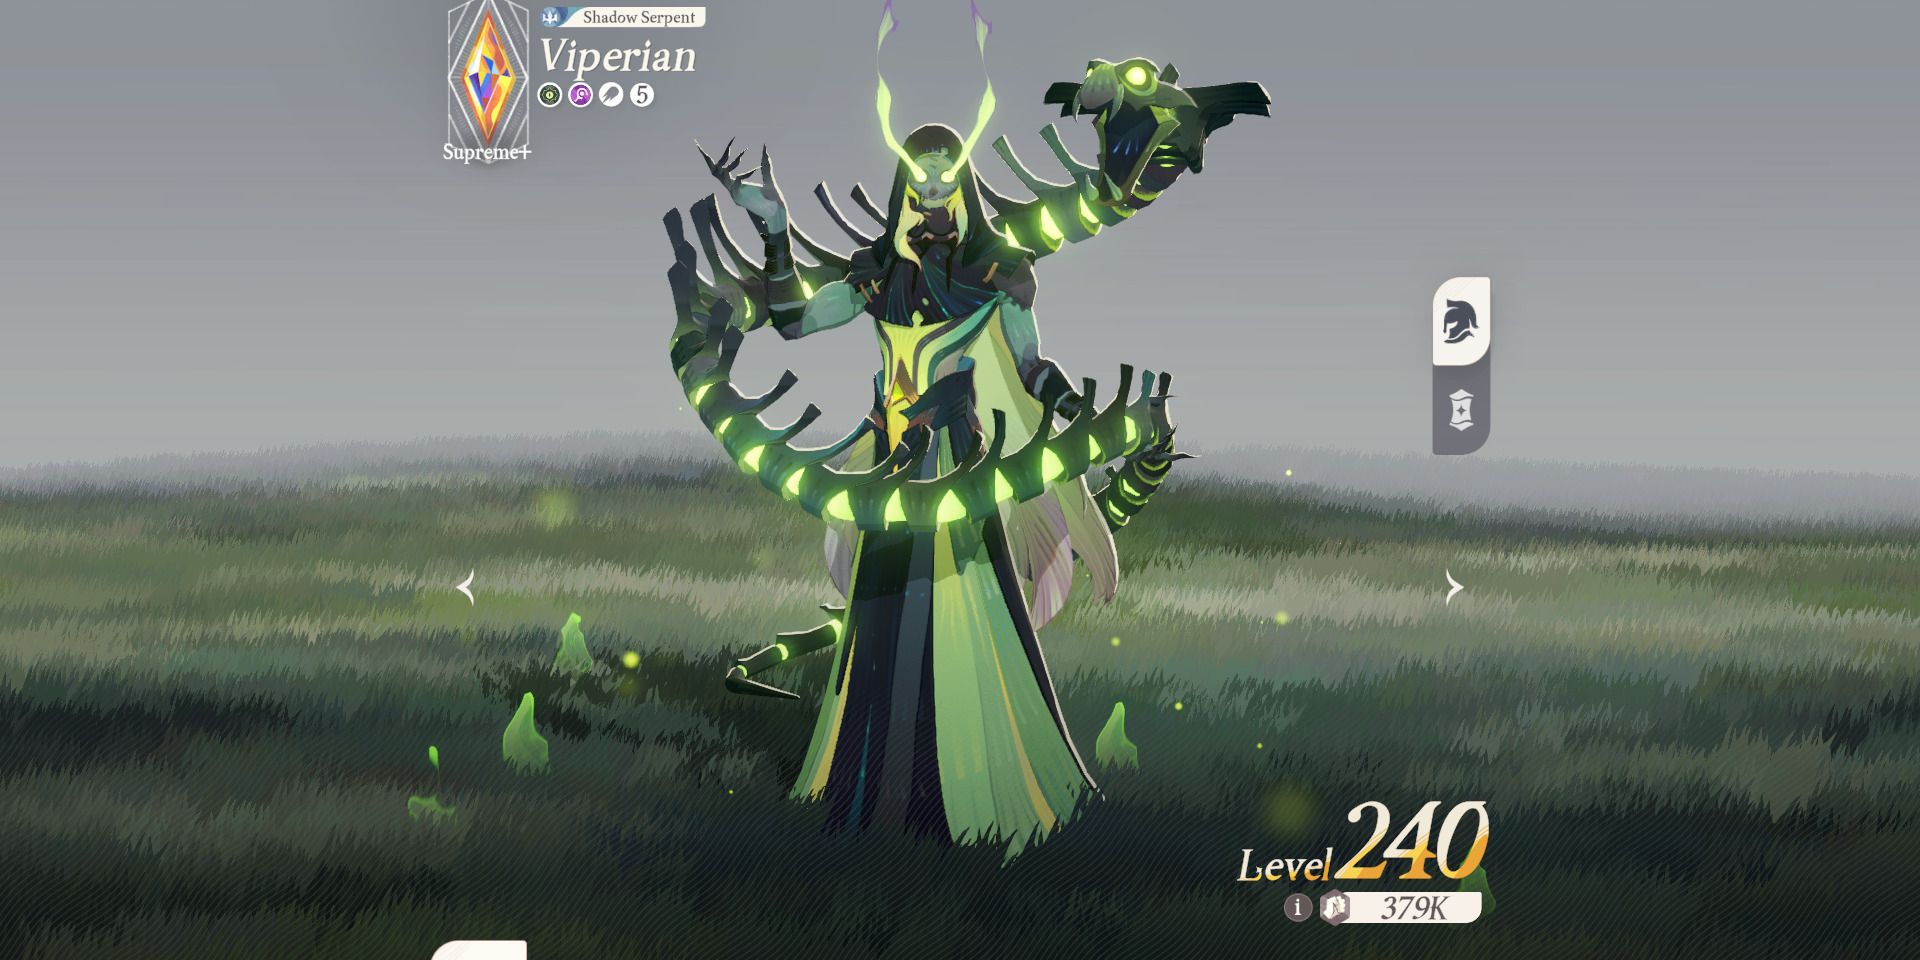 Image of the mage character Viperian in AFK Journey